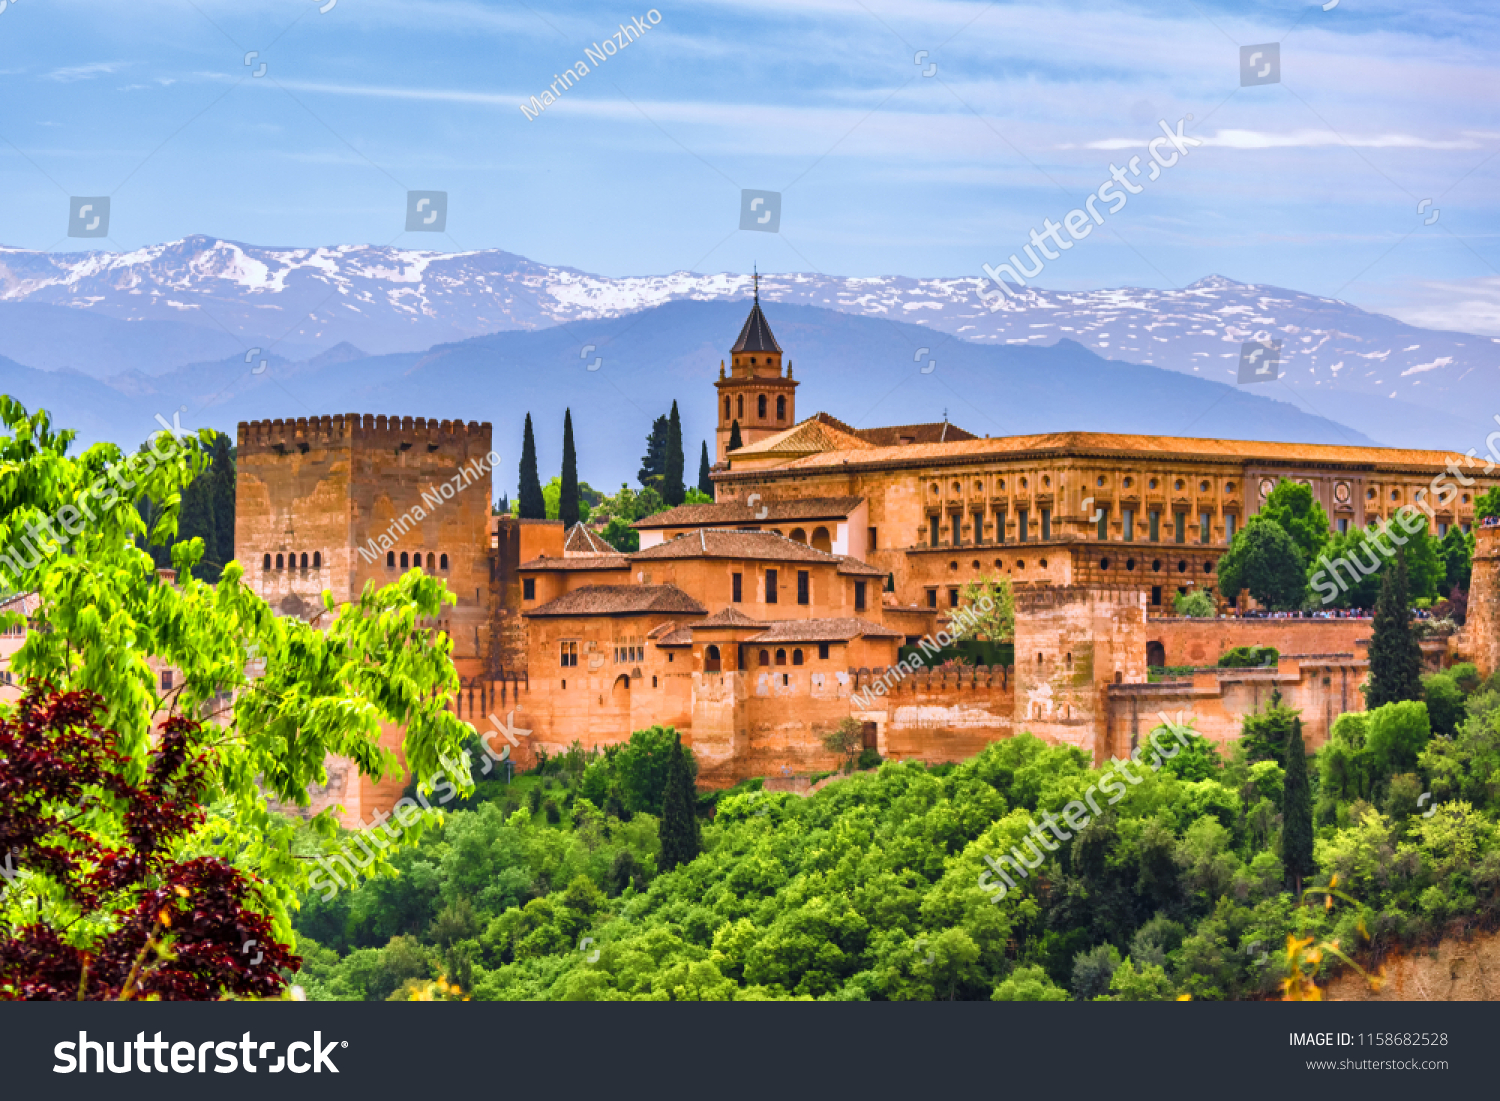 Wiew of the Alhambra from Albaicyn, Granada, Andalucia, Spain #1158682528